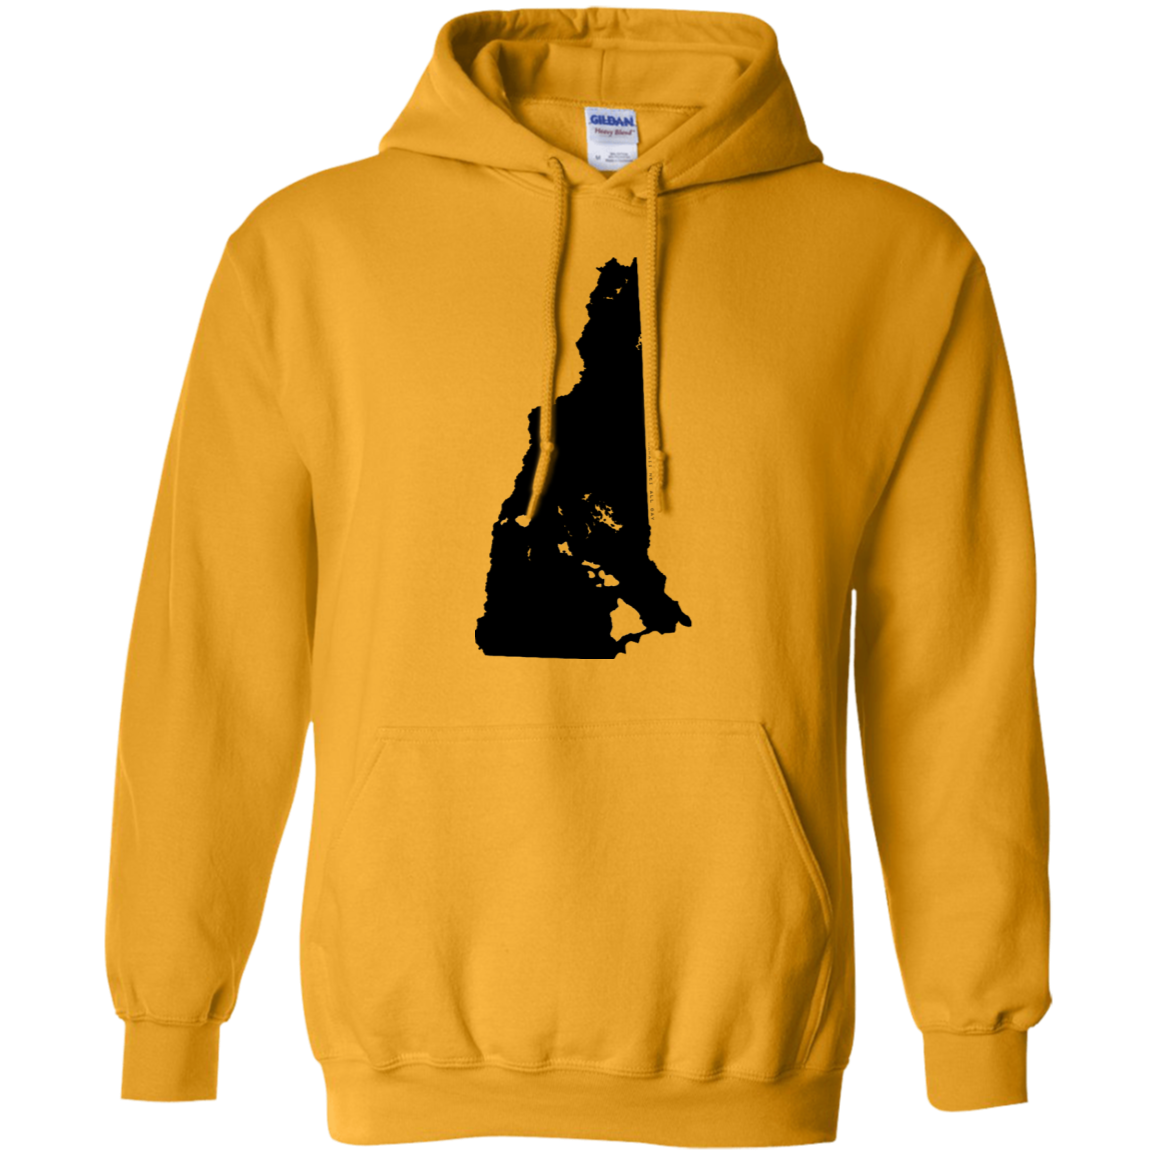 Living in New Hampshire with Hawaii Roots Pullover Hoodie 8 oz., Sweatshirts, Hawaii Nei All Day